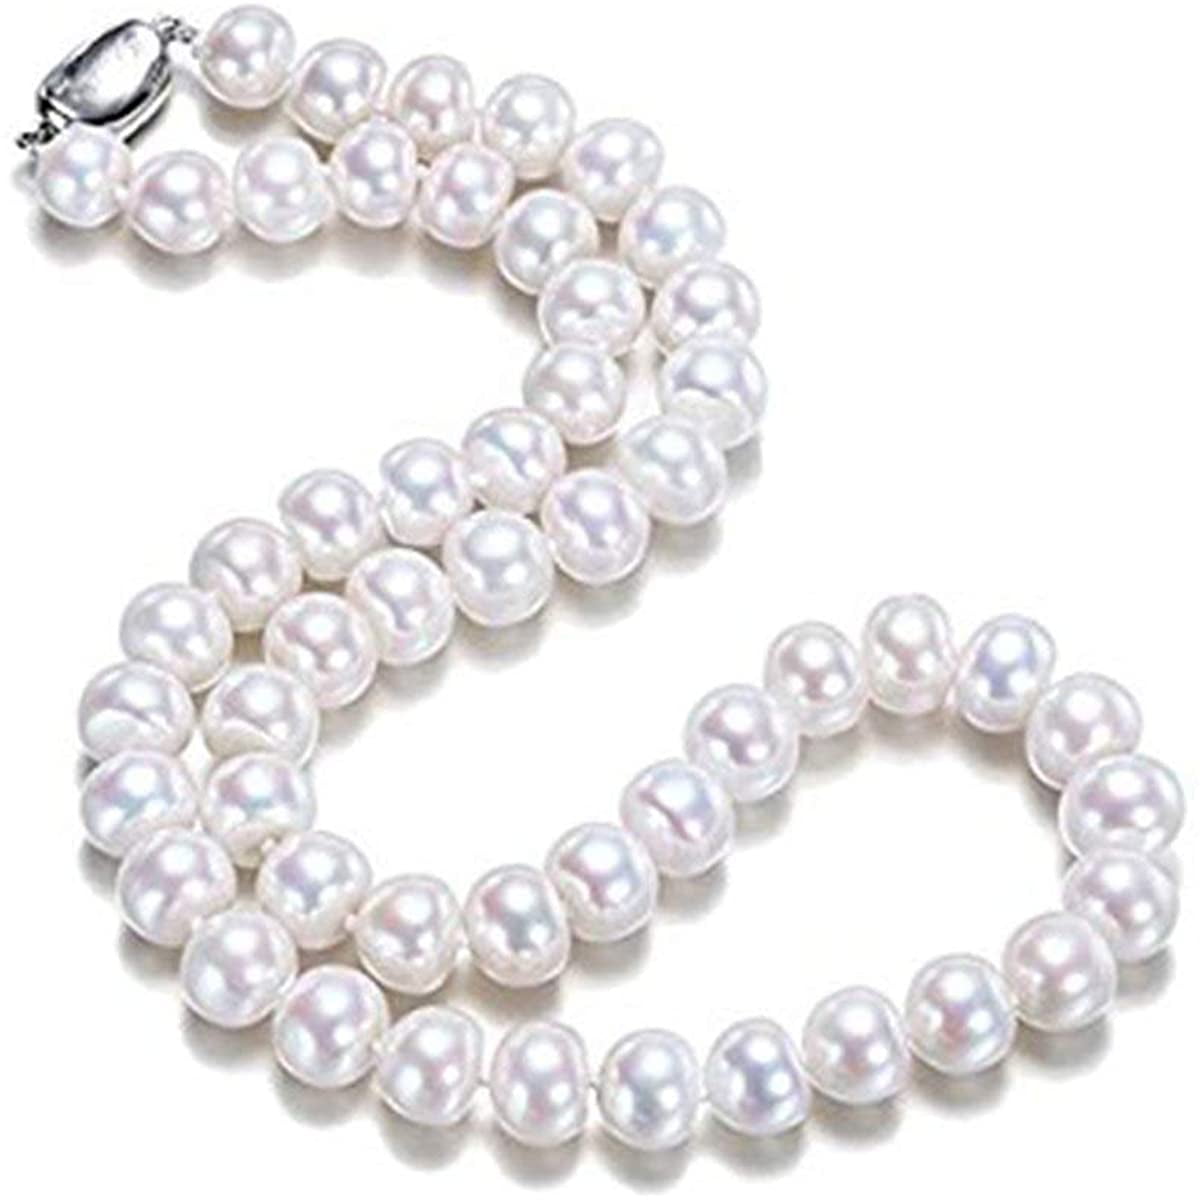 Genuine 7-9mm Rice Shape Baroque Freshwater Cultured Real Pearl Necklace 18'' AA 